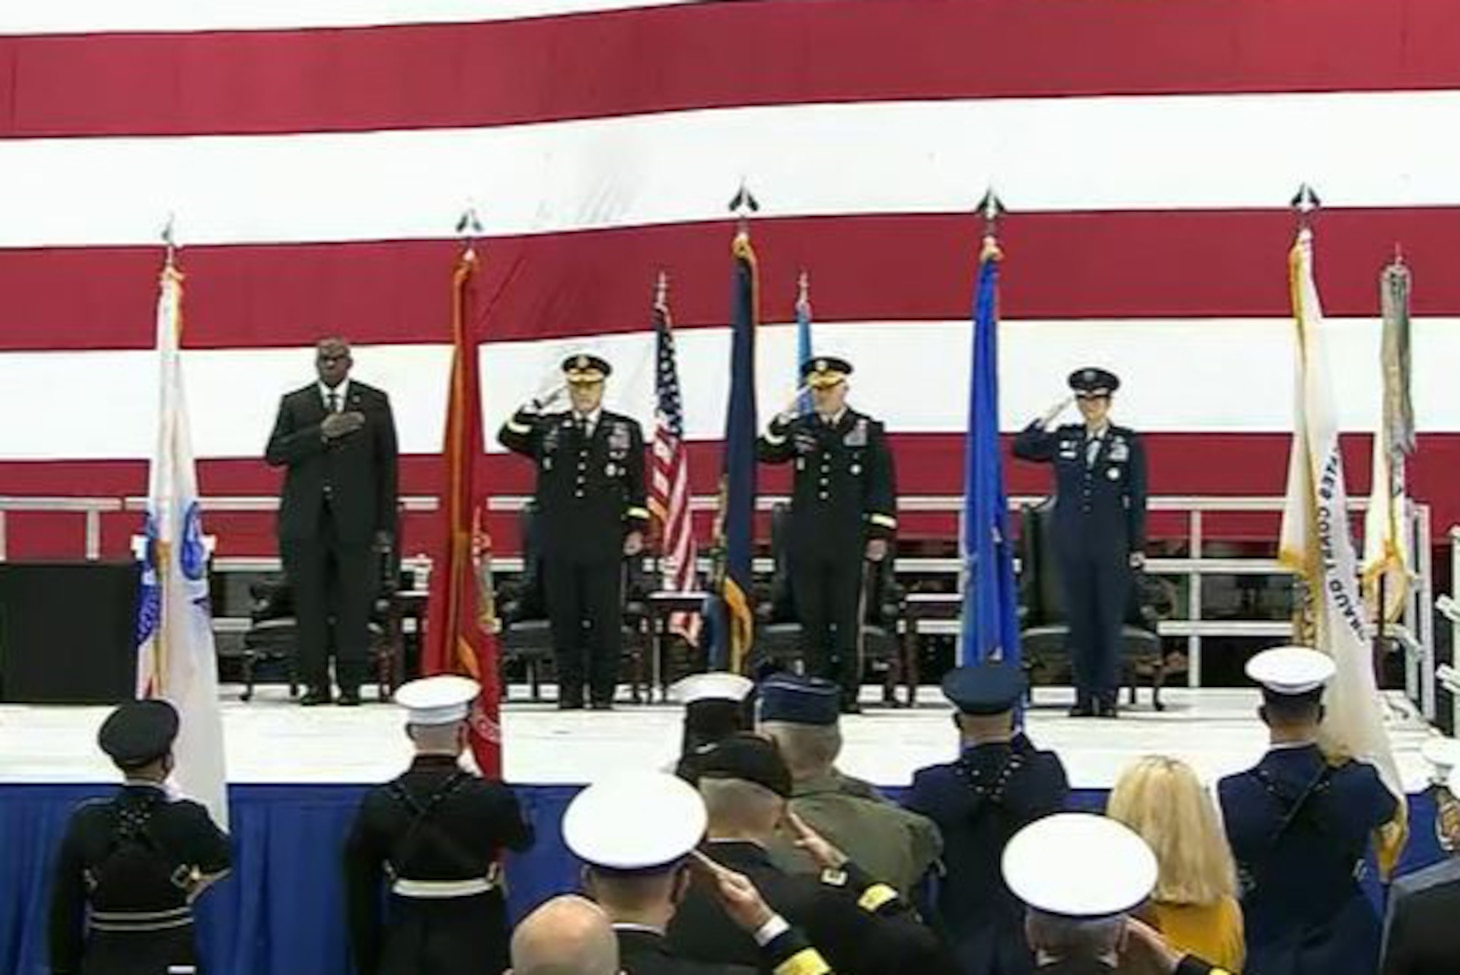 Defense Department leaders salute on a stage in front of a large American flag.